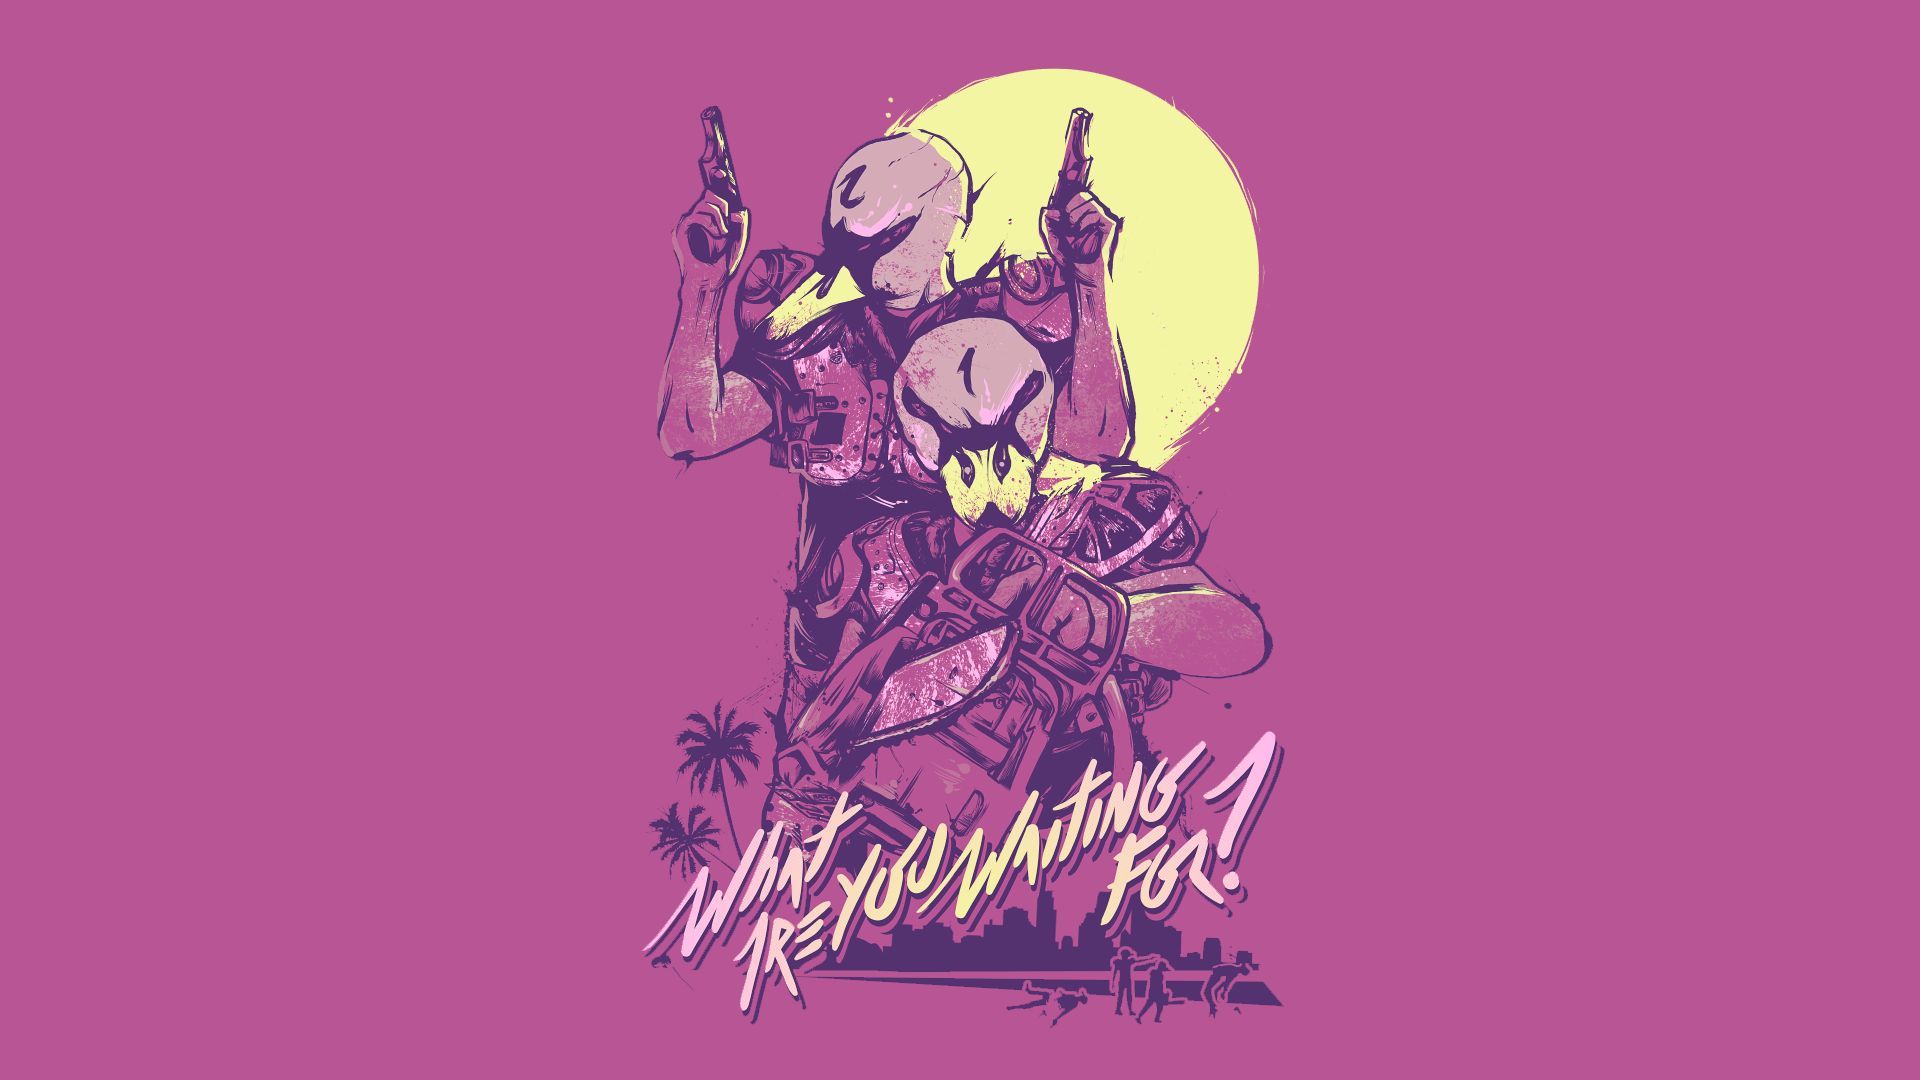 hotline miami, hotline miami 2: wrong number, video game